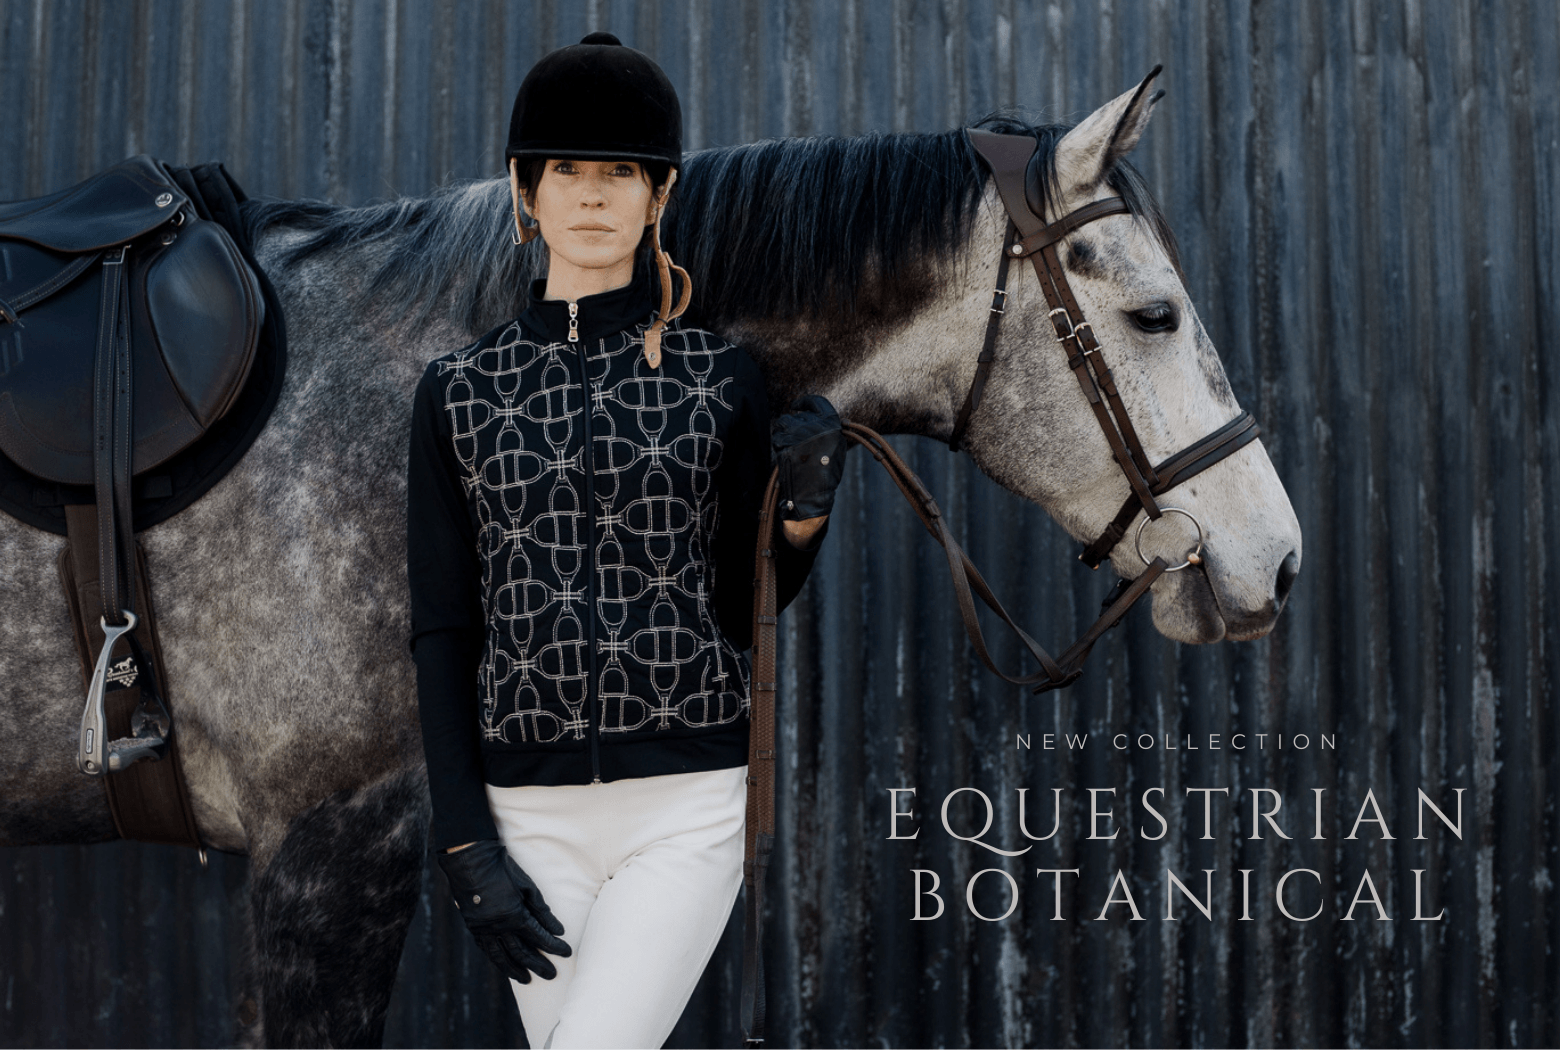 New Collection - Equestrian Botanical